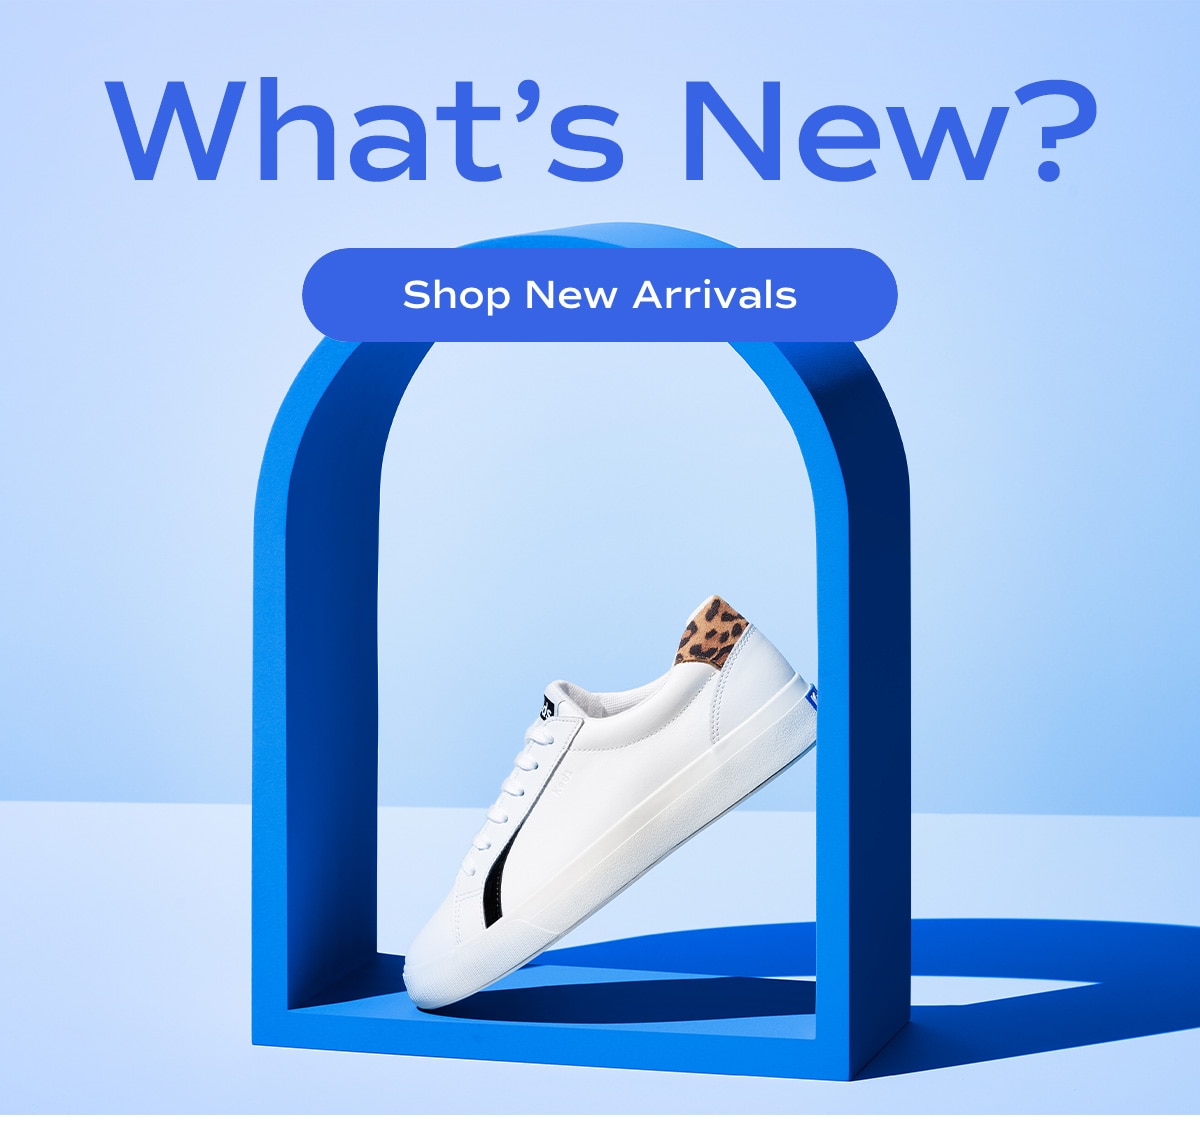 What's New? Shop New Arrivals